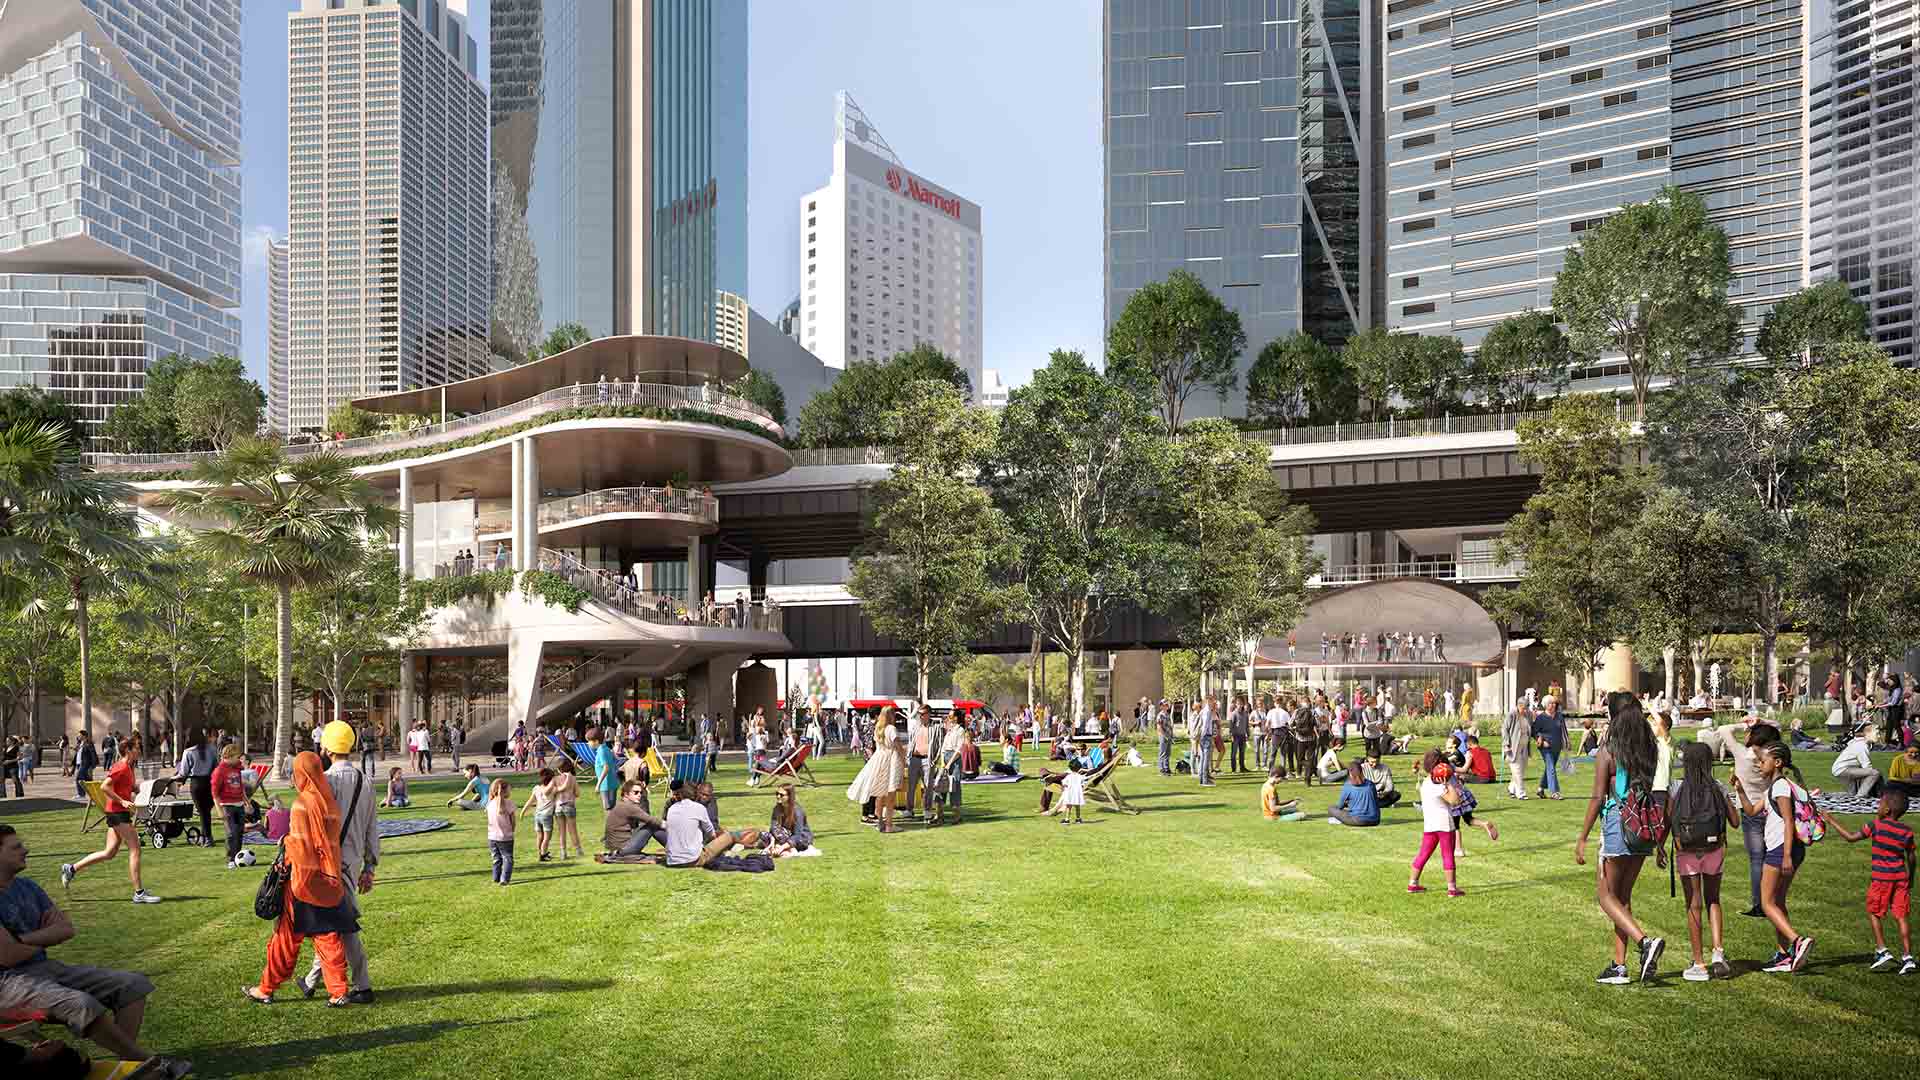 Sydney Might Get Its Own High Line-Style Park in a Huge Circular Quay and Cahill Expressway Revamp